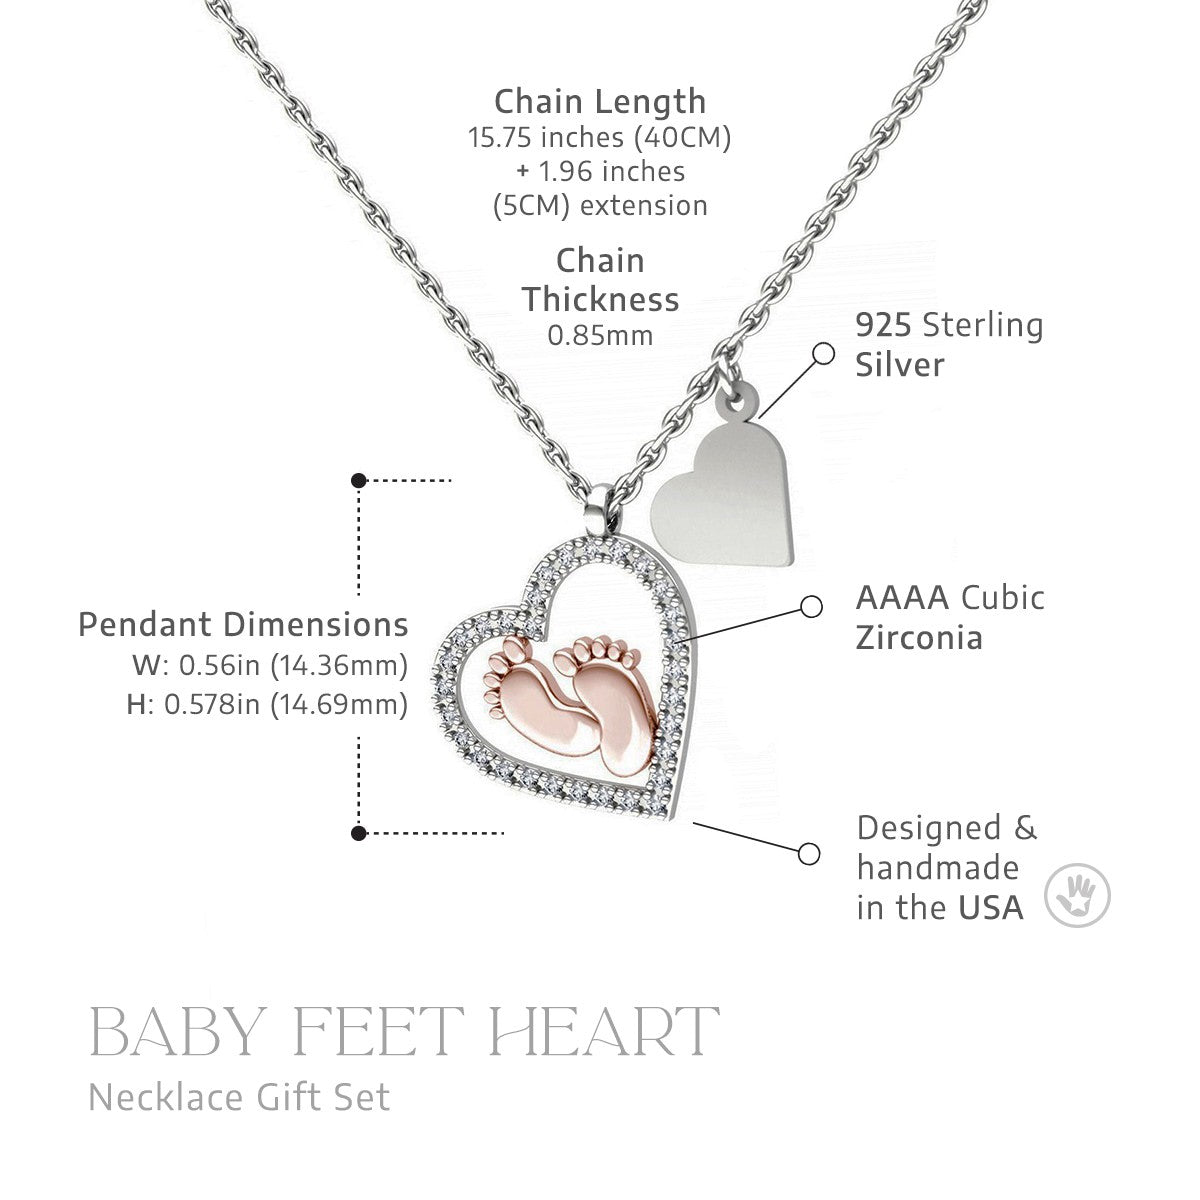 To My Mommy, Finally in your Arms (Pink Edition) - Baby Feet Necklace Gift Set